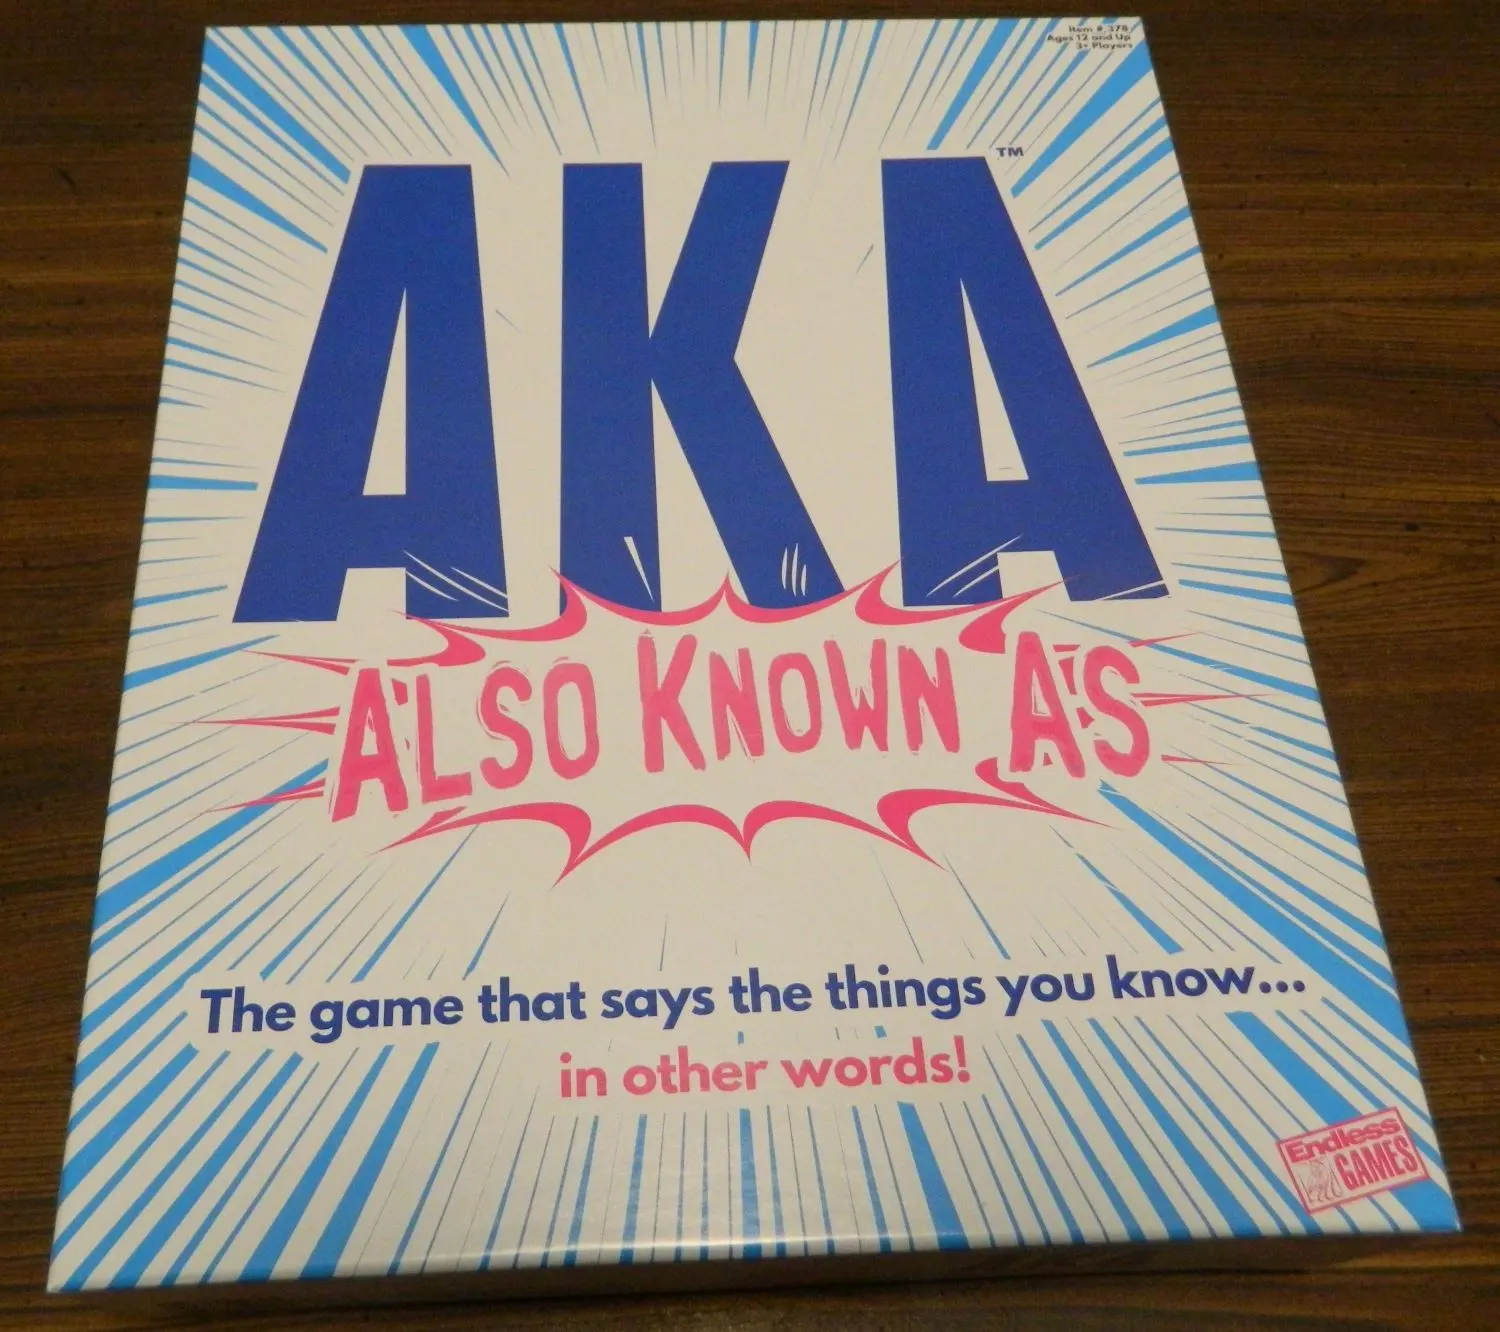 Box for AKA Also Known As